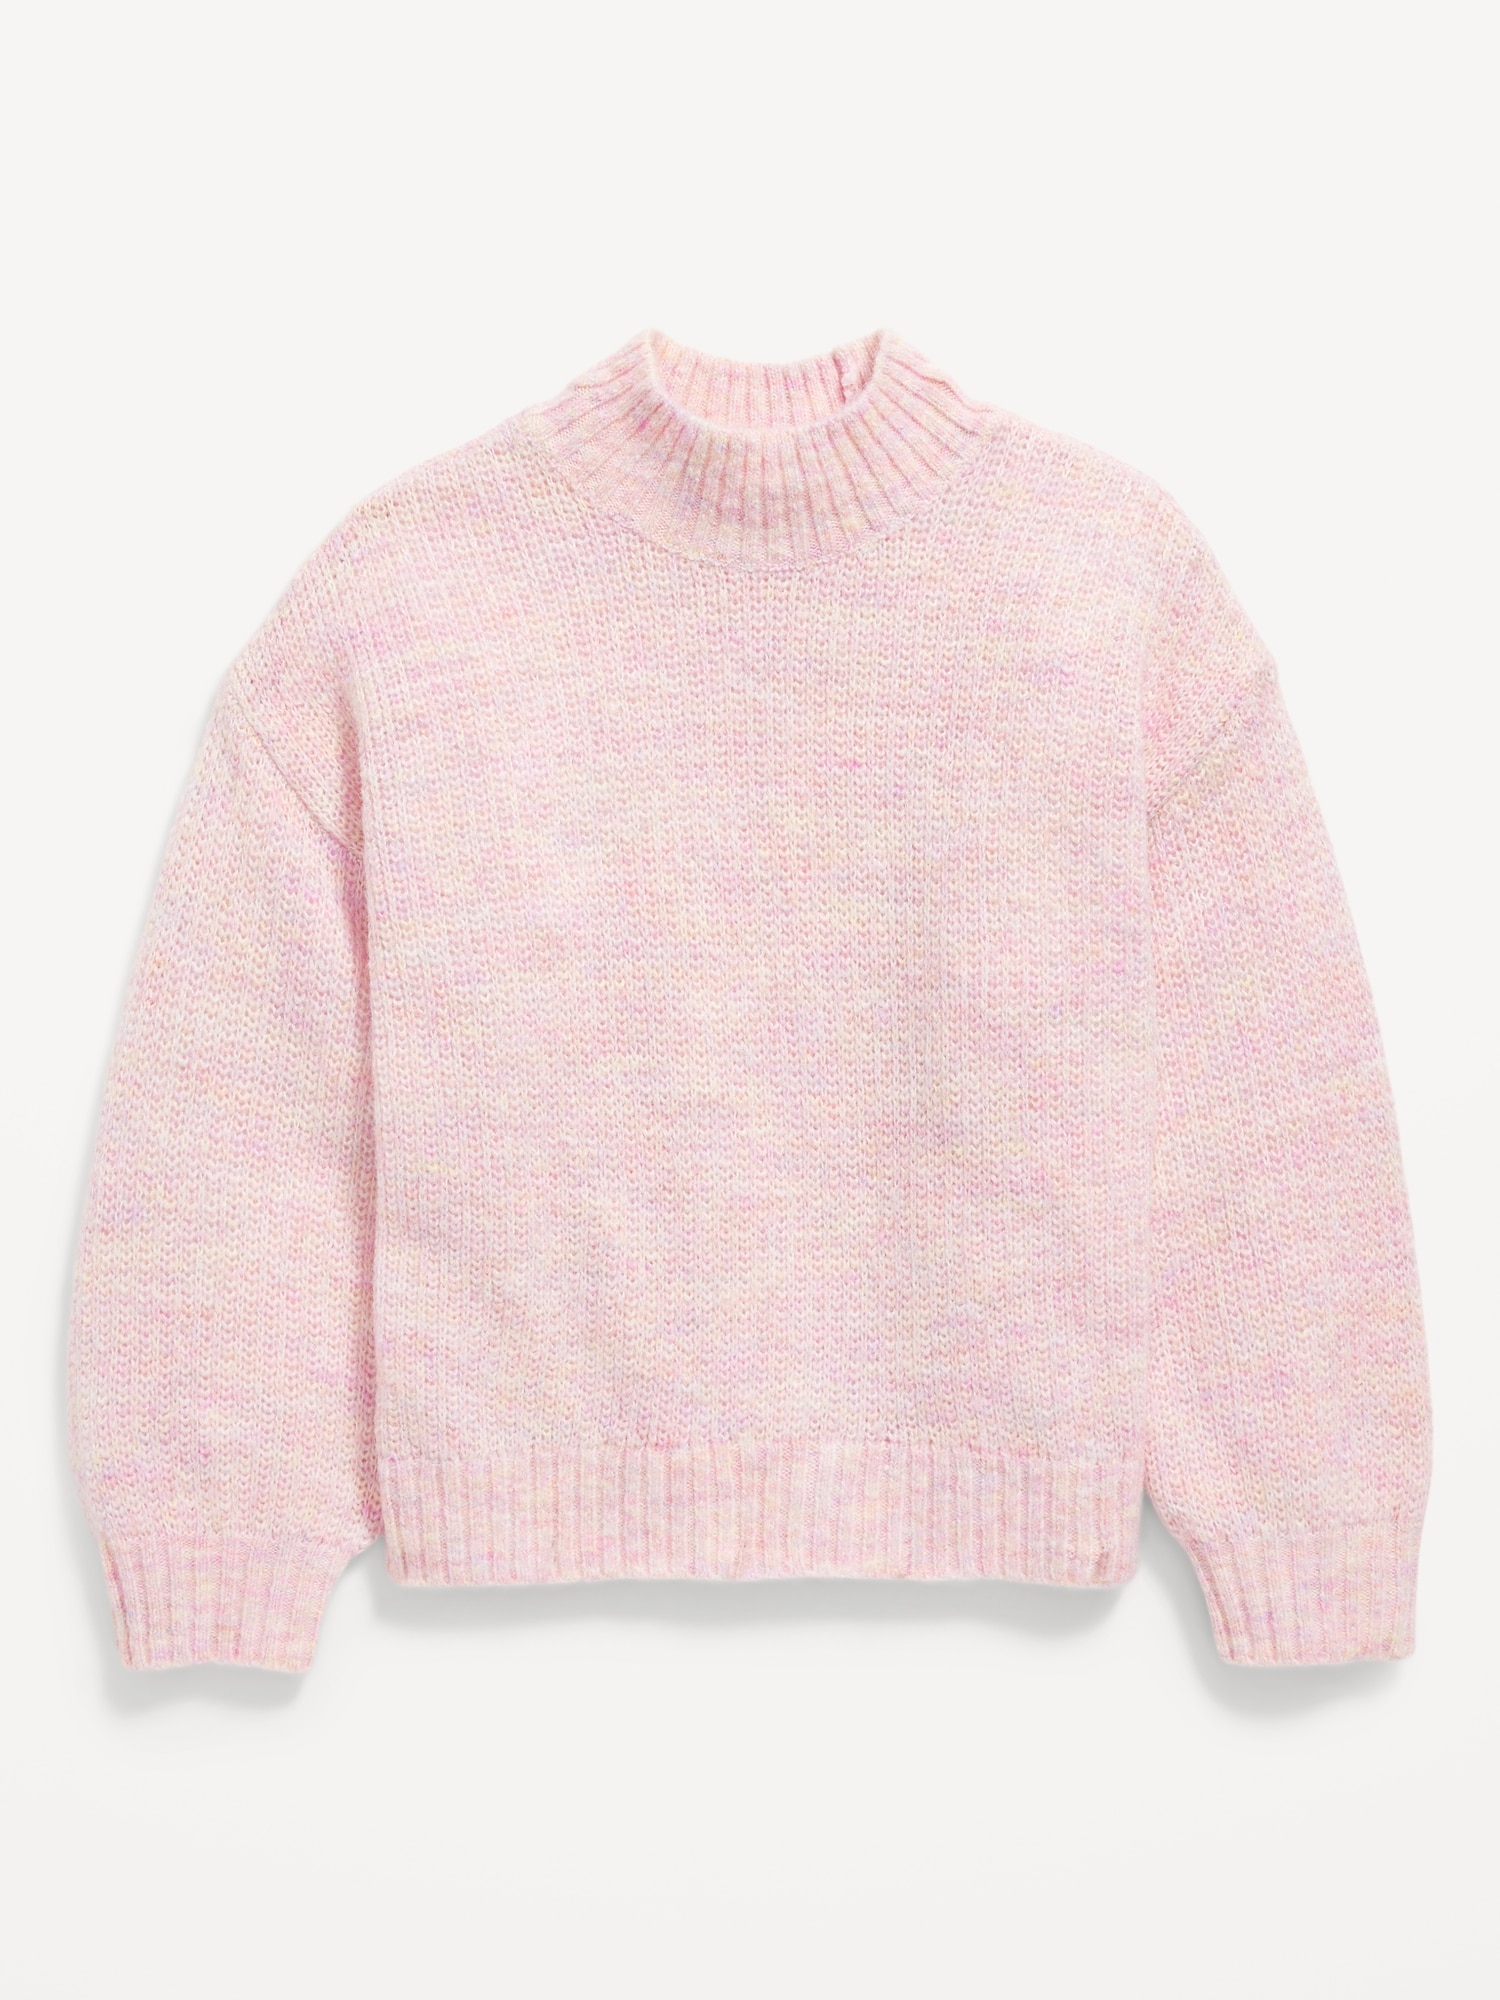 Old Navy Cozy Mock-Neck Shaker-Stitch Cocoon Sweater for Girls pink. 1